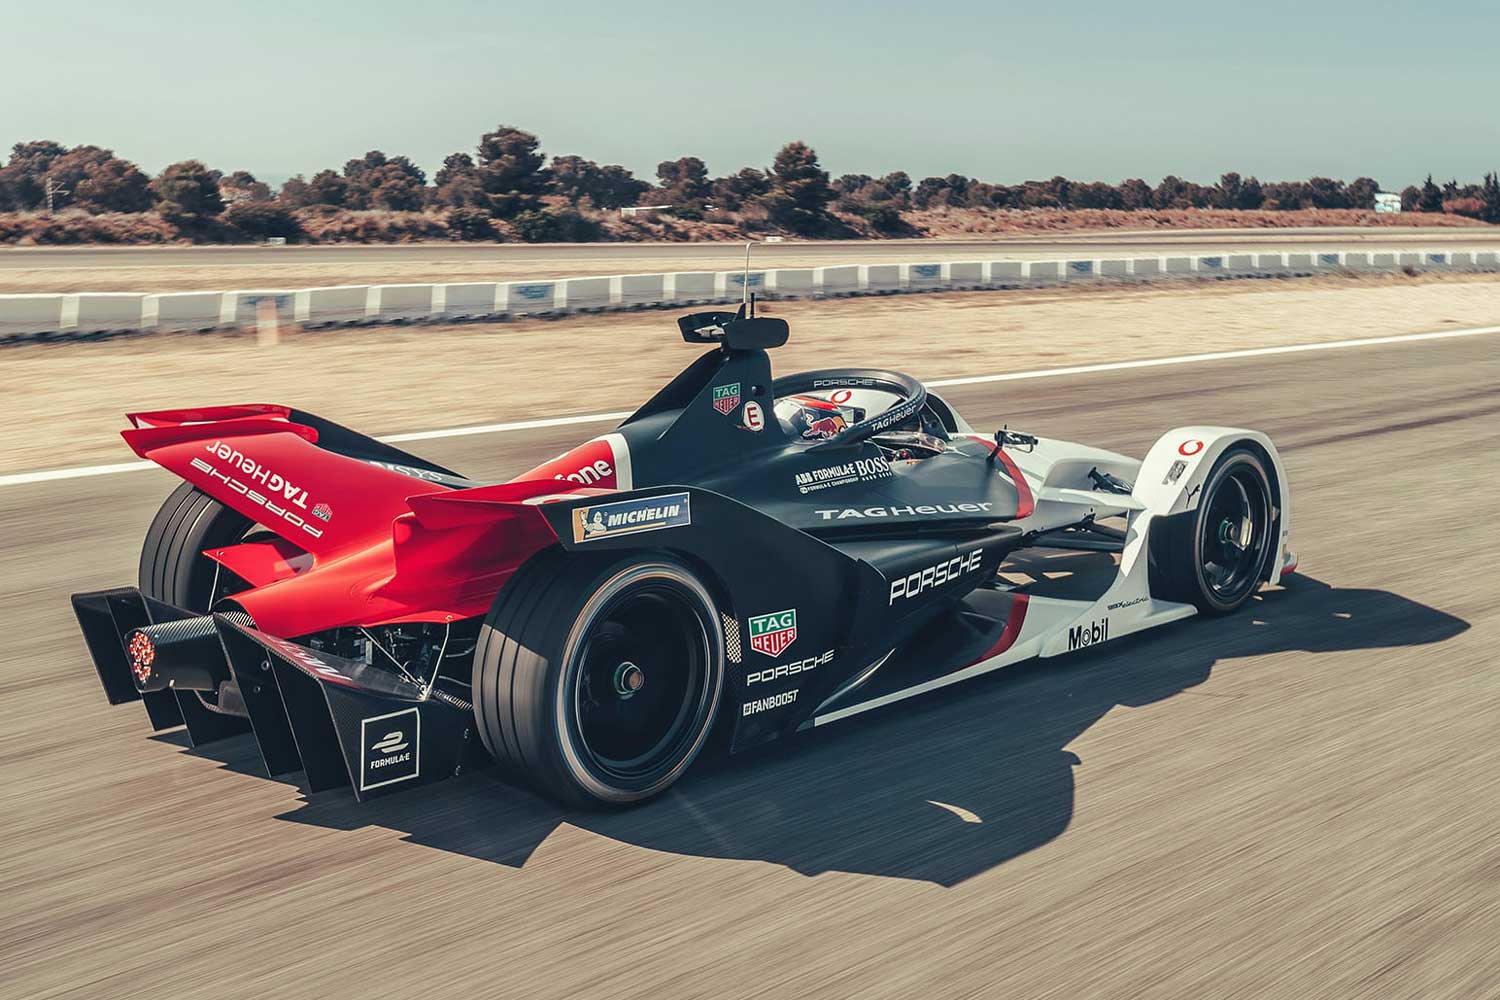 In 2019, TAG Heuer and Porsche partnered on a new Formula E team to contribute to the world of single-seater electric car races.